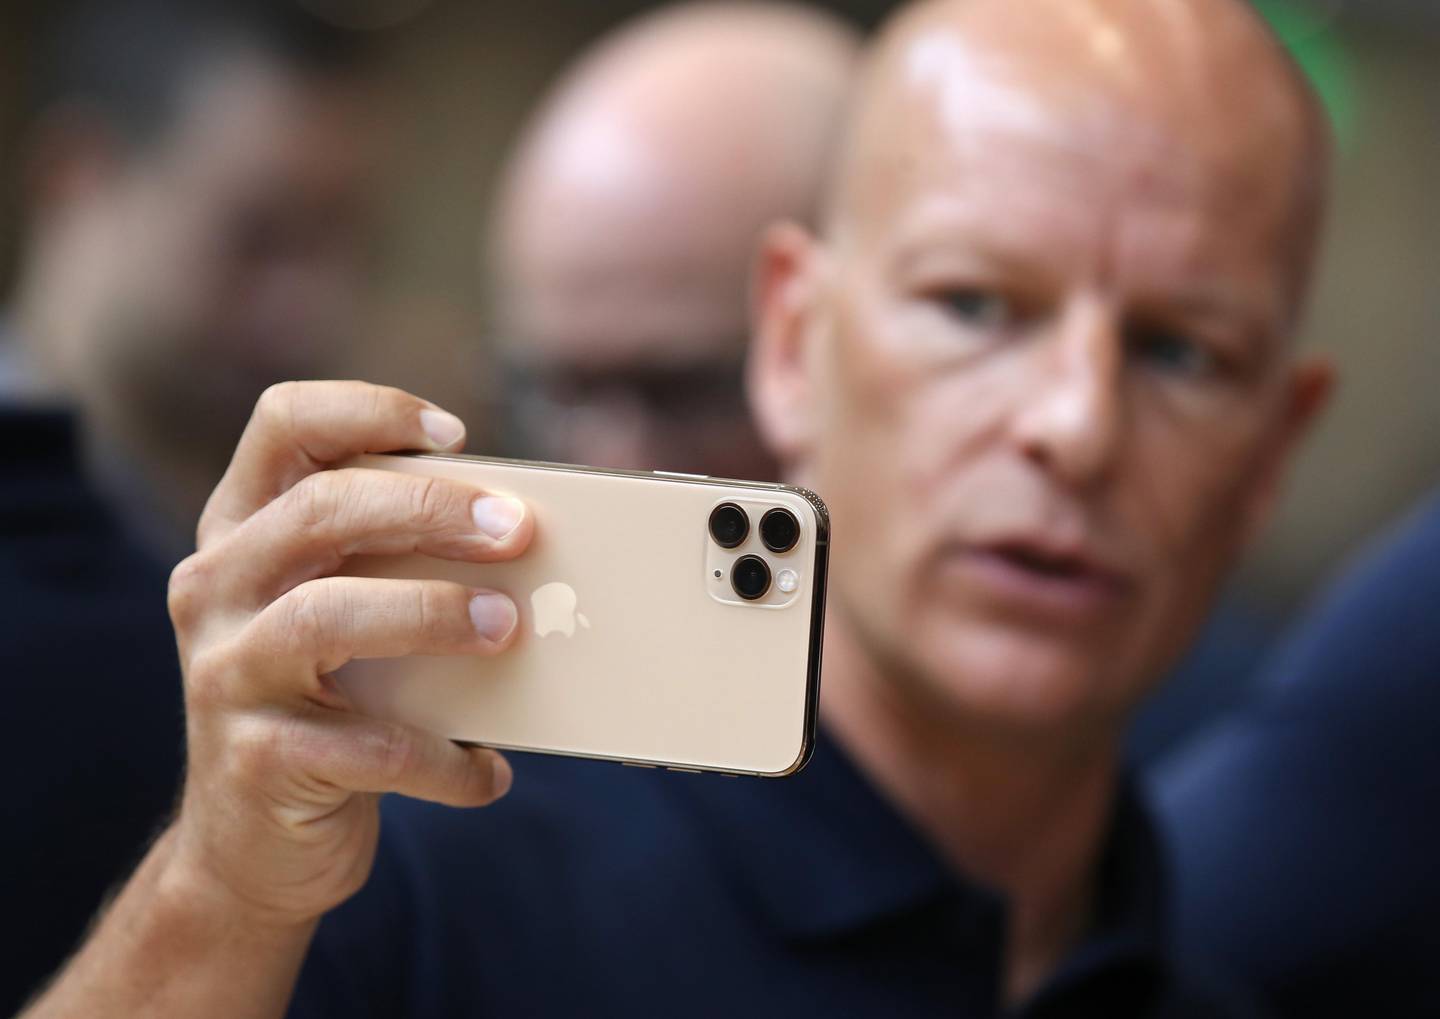 CUPERTINO, CALIFORNIA - SEPTEMBER 10: An attendee look at the new Apple iPhone 11 Pro during an Apple special event on September 10, 2019 in Cupertino, California. Apple unveiled several new products including an iPhone 11, iPhone 11 Pro, Apple Watch Series 5 and an updated iPad.   Justin Sullivan/Getty Images/AFP
== FOR NEWSPAPERS, INTERNET, TELCOS & TELEVISION USE ONLY ==